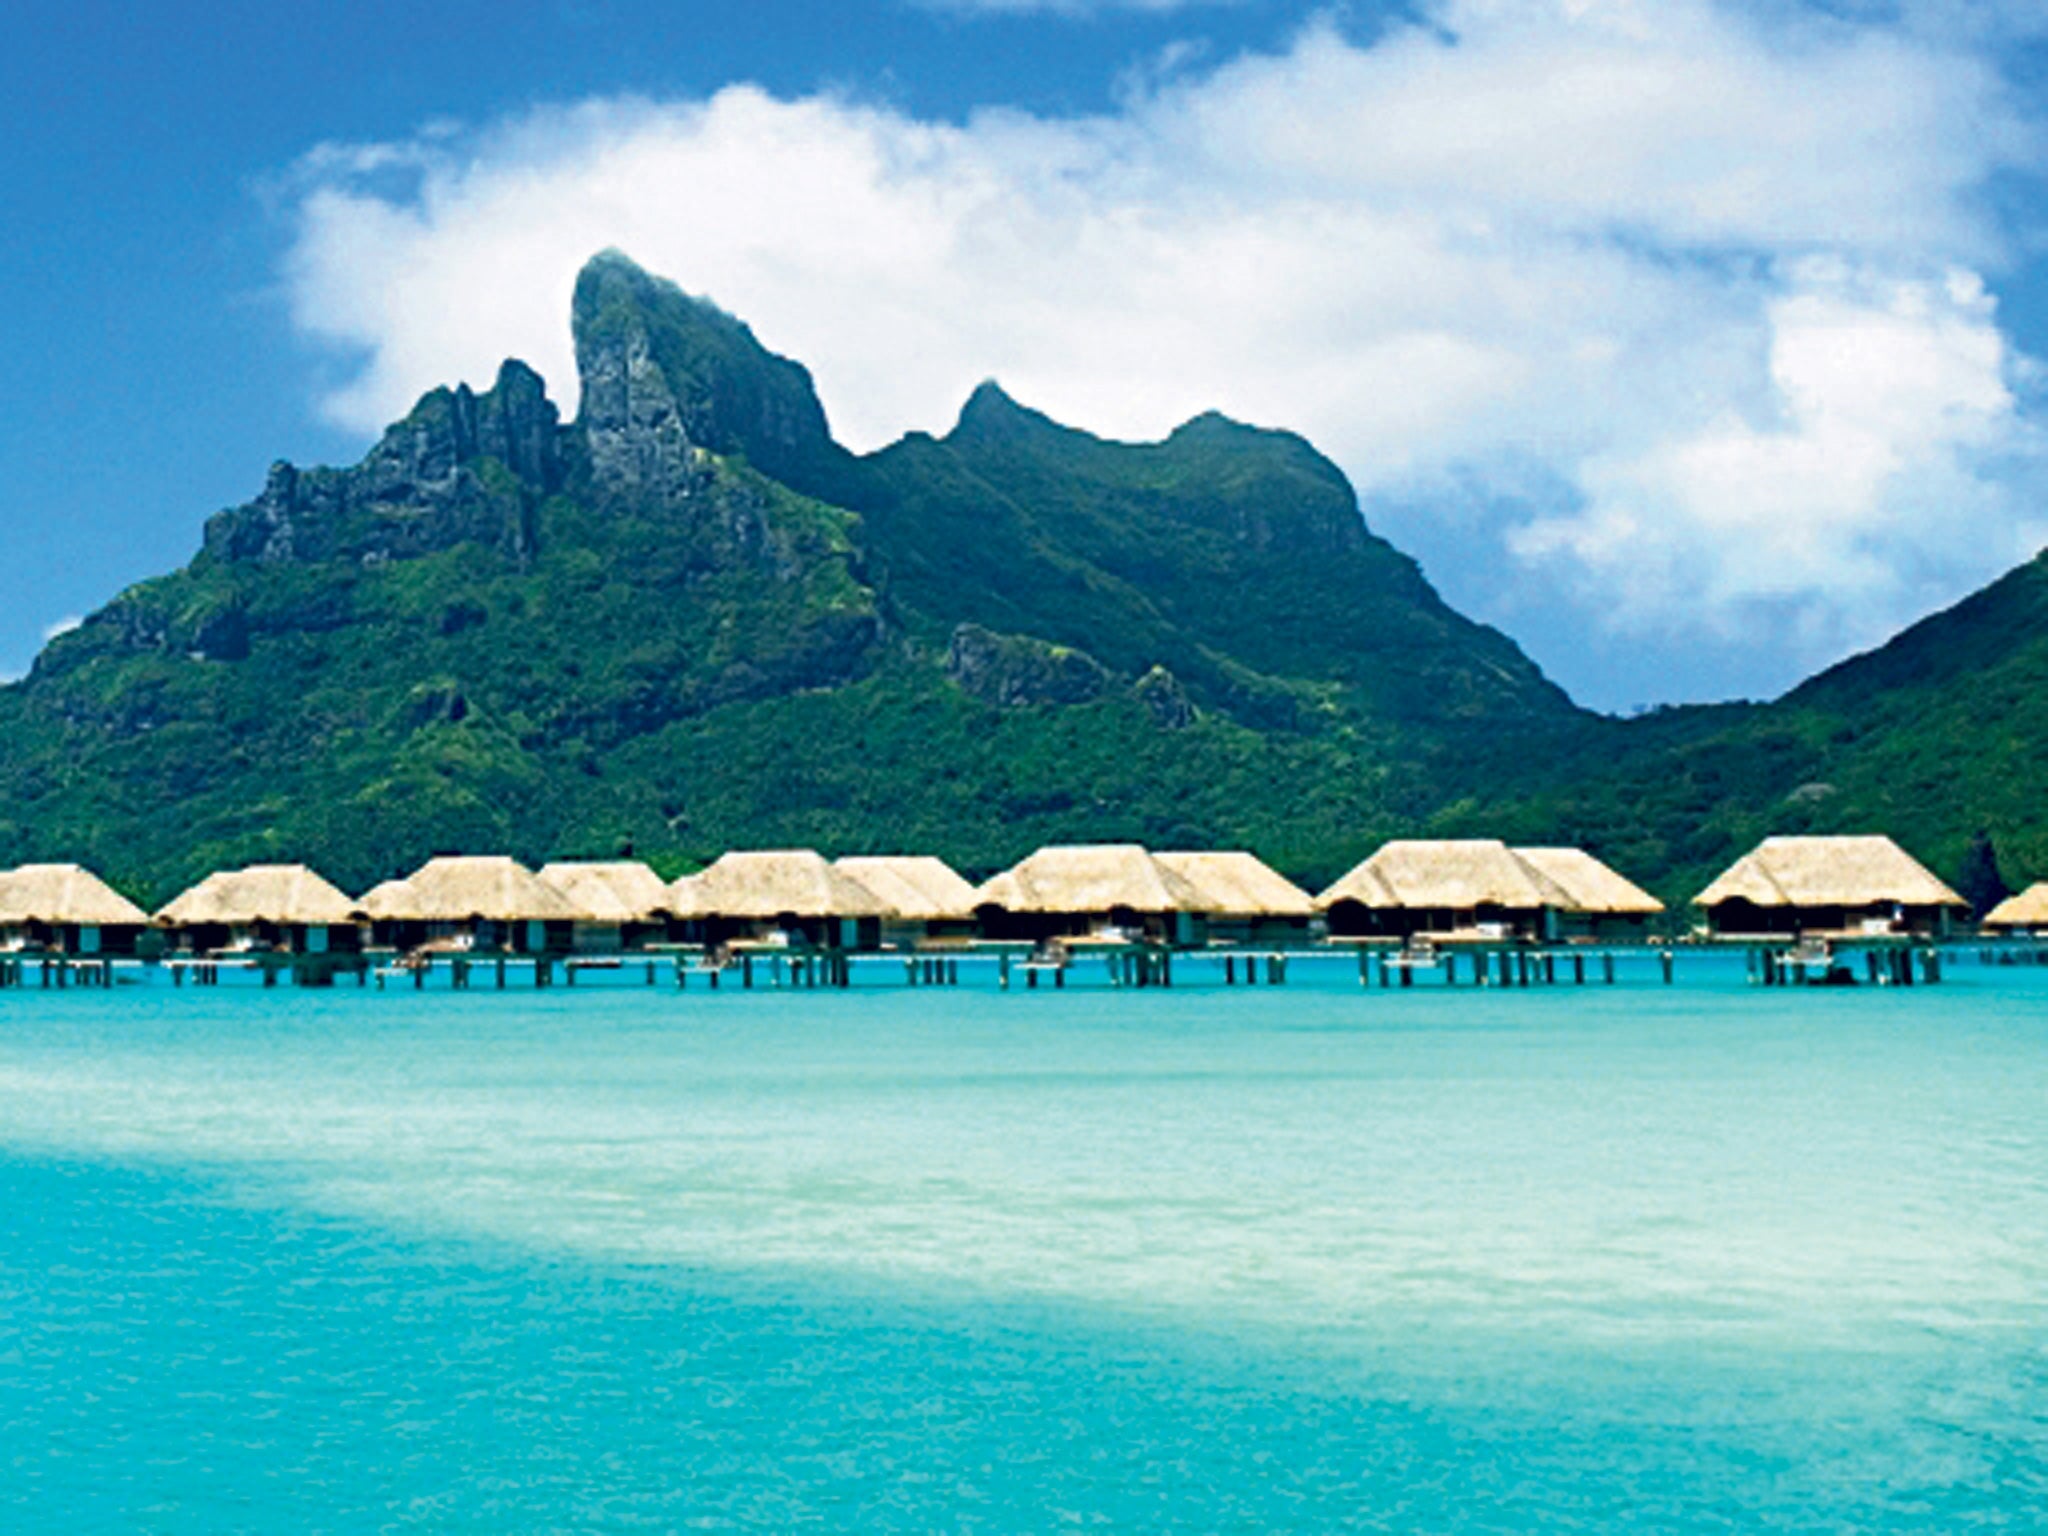 Into the blue: the tranquil beauty of Bora Bora in French Polynesia